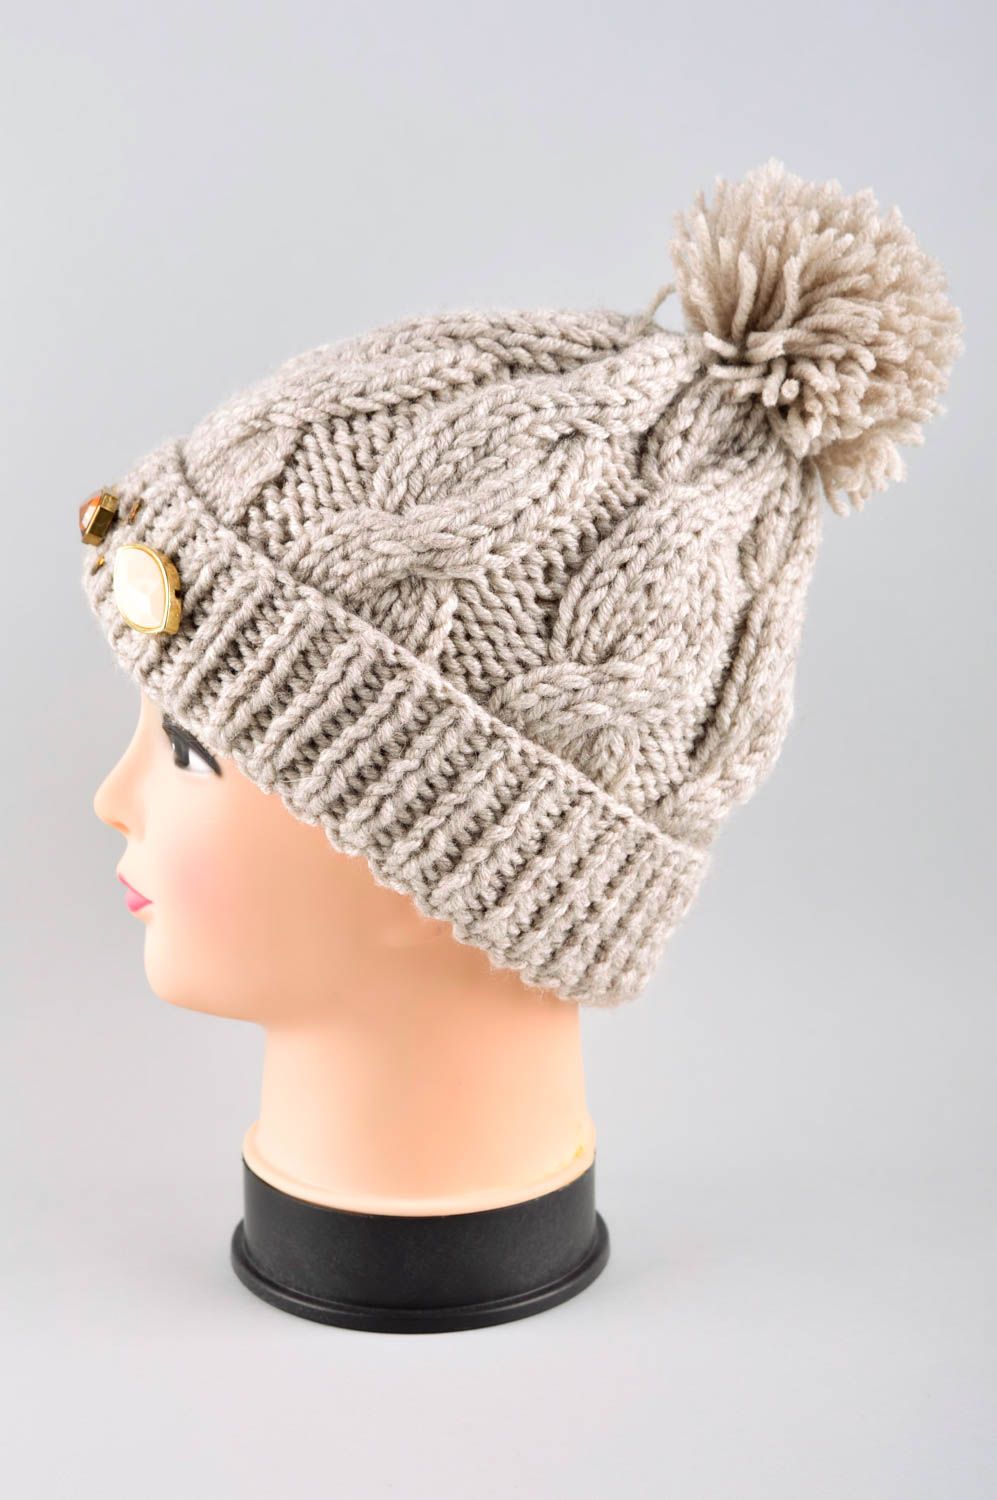 Handmade cute winter cap knitted warm accessories stylish hat for women photo 3